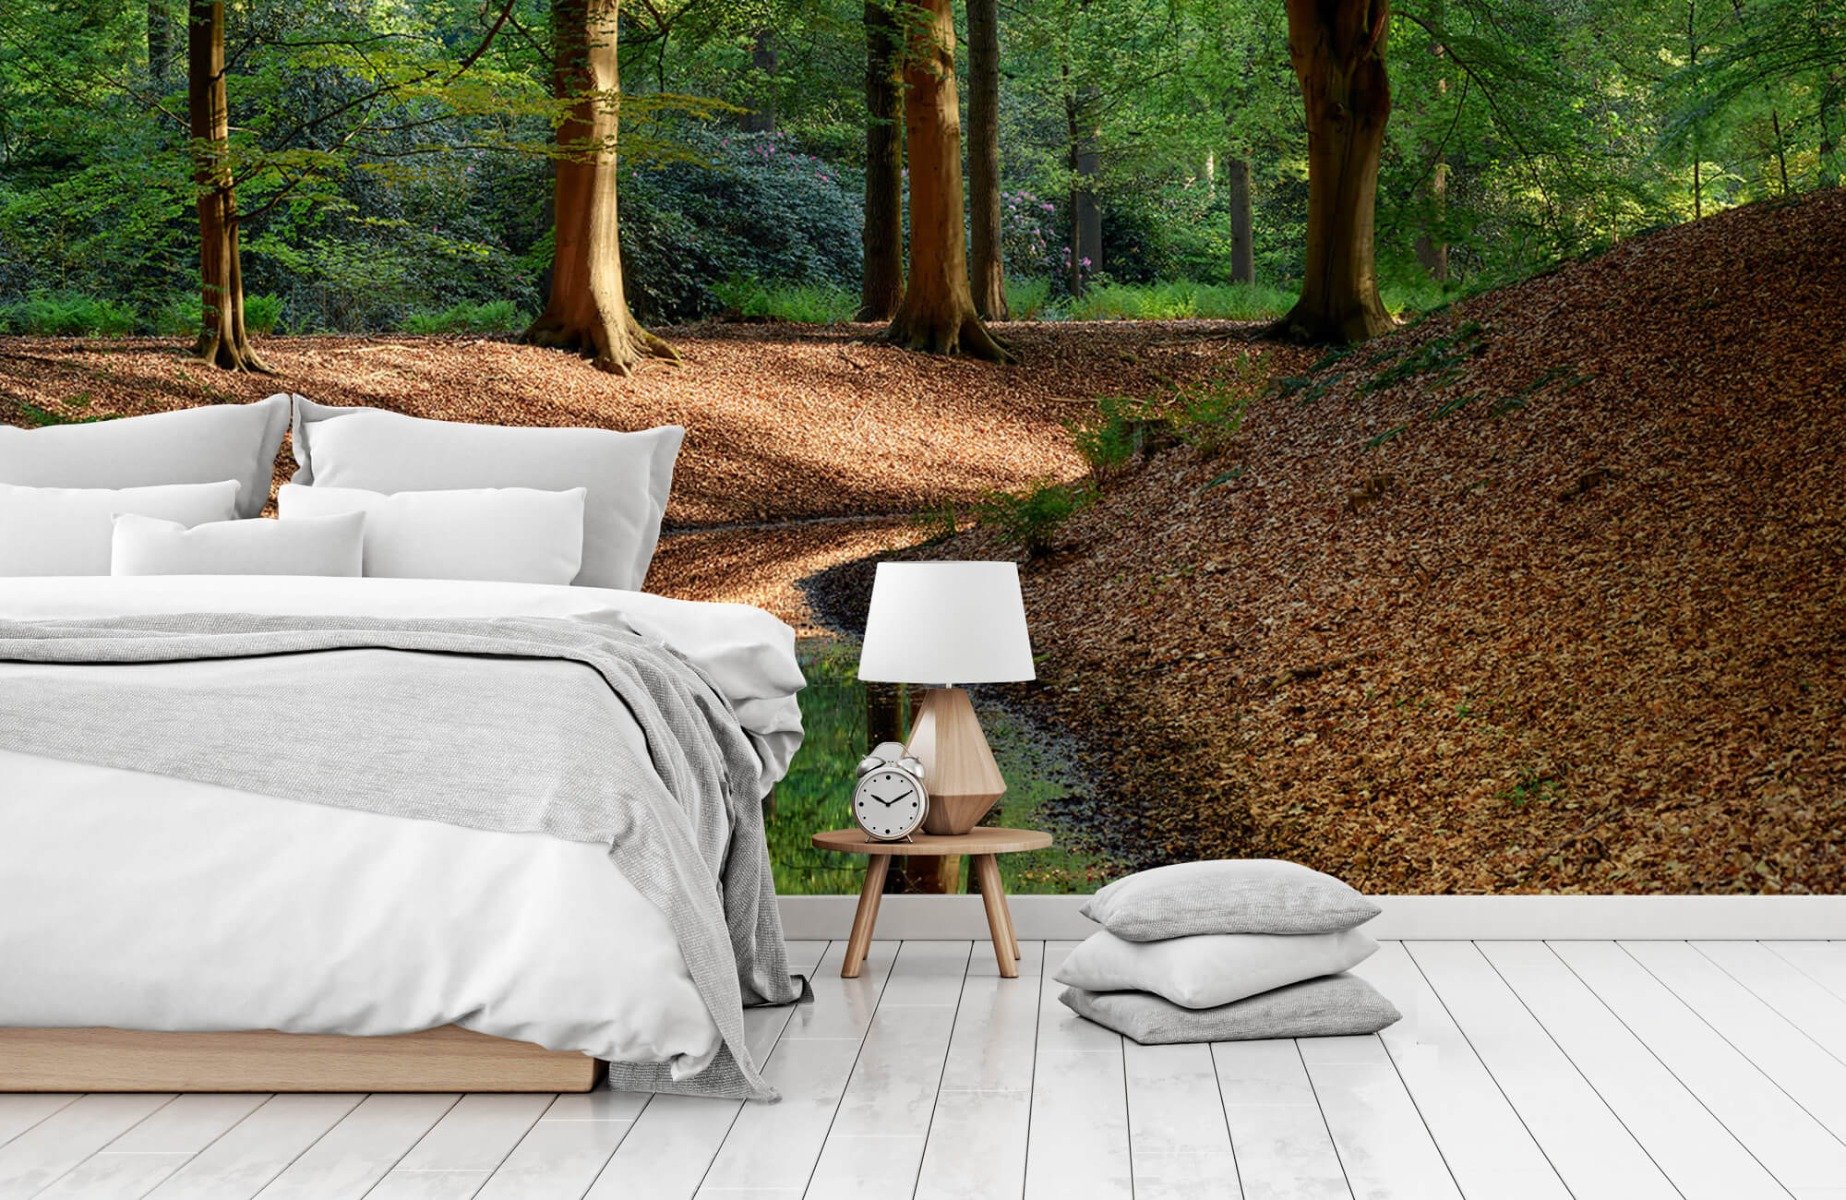 Forest wallpaper - Brooklet in the forest  - Bedroom 15